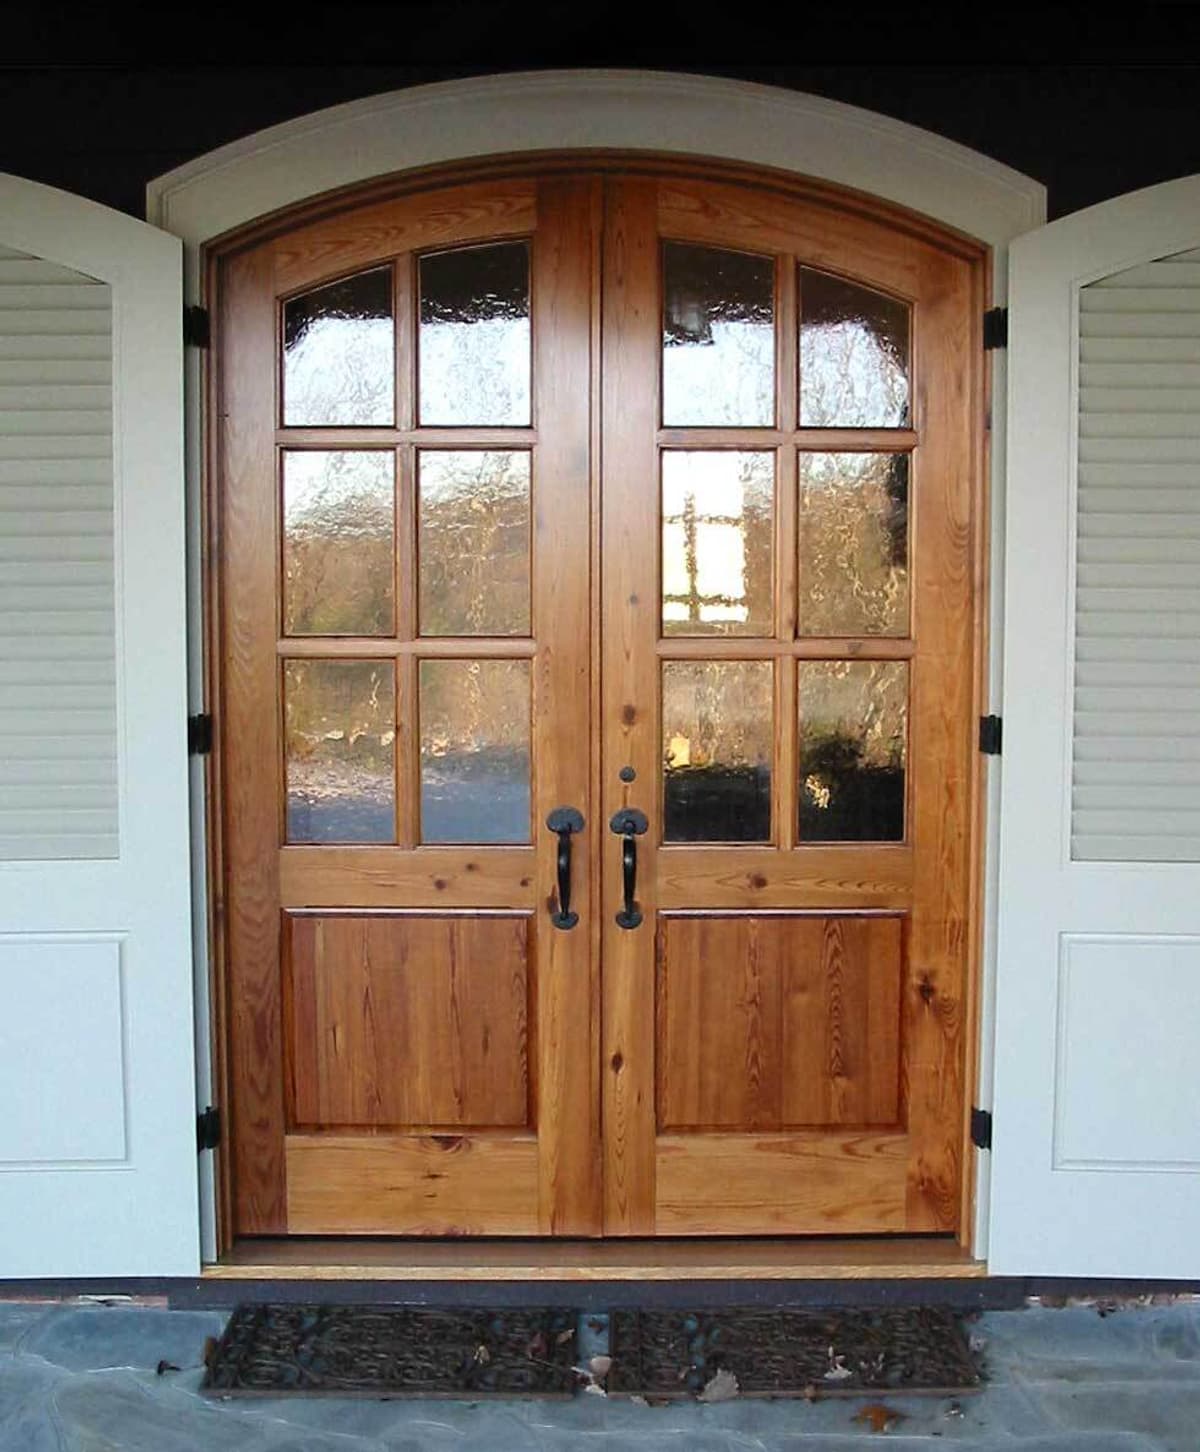 Reclaimed heart pine entry door to Lake Toxaway North Carolina home.